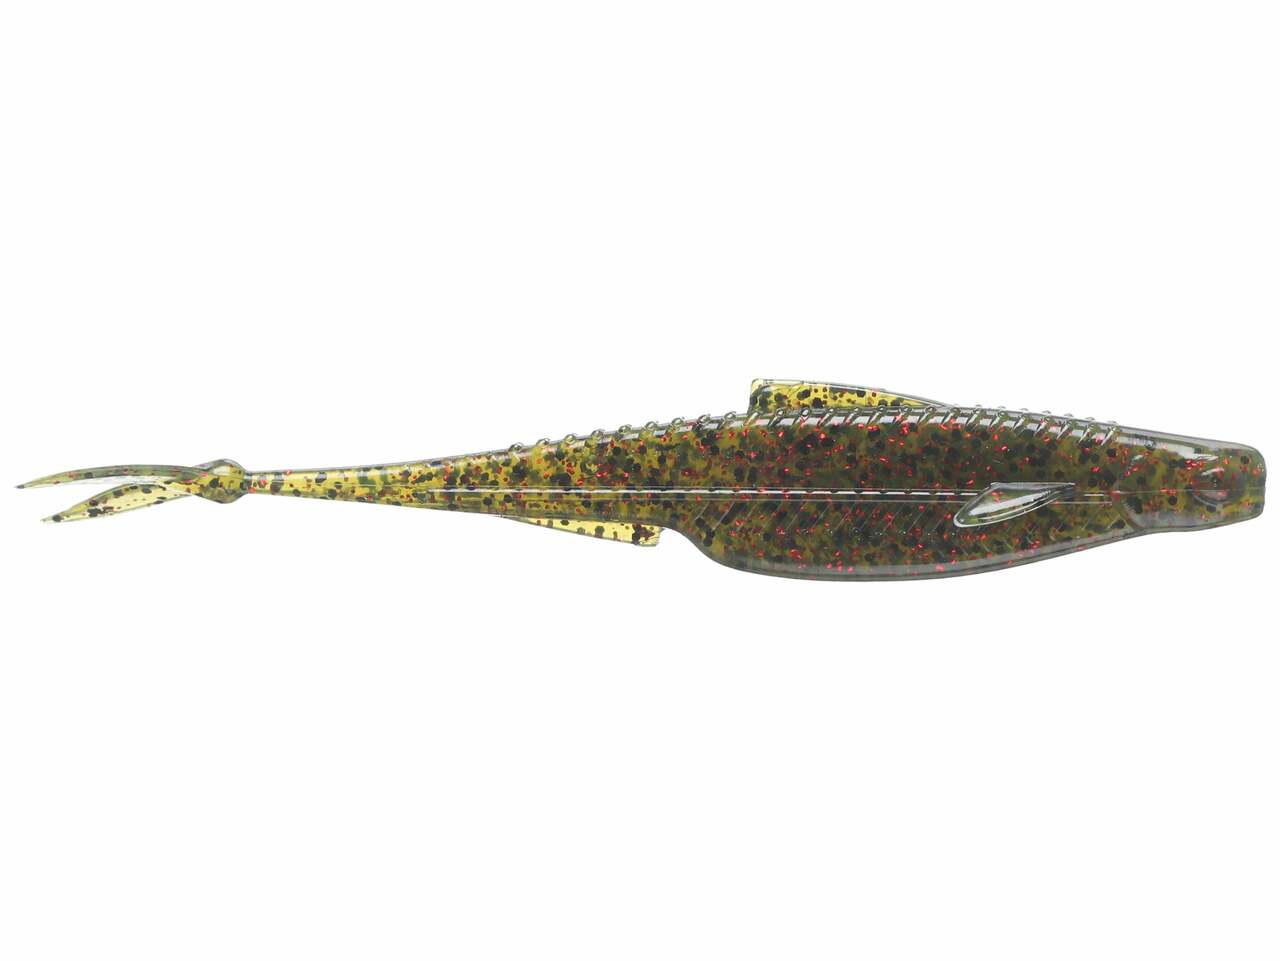 More than just your average soft plastic jerkbait, the 6th sense Flush Soft Jerkbait is packed with a number of details and realistic features that separate it from the competition. Measuring at 5.2” in length, this fluke style bait features a split belly and fork tail, but also includes matching pectoral fins, a dorsal fin, and keeled belly that allow the bait to remain in a balanced, upright position when fishing.